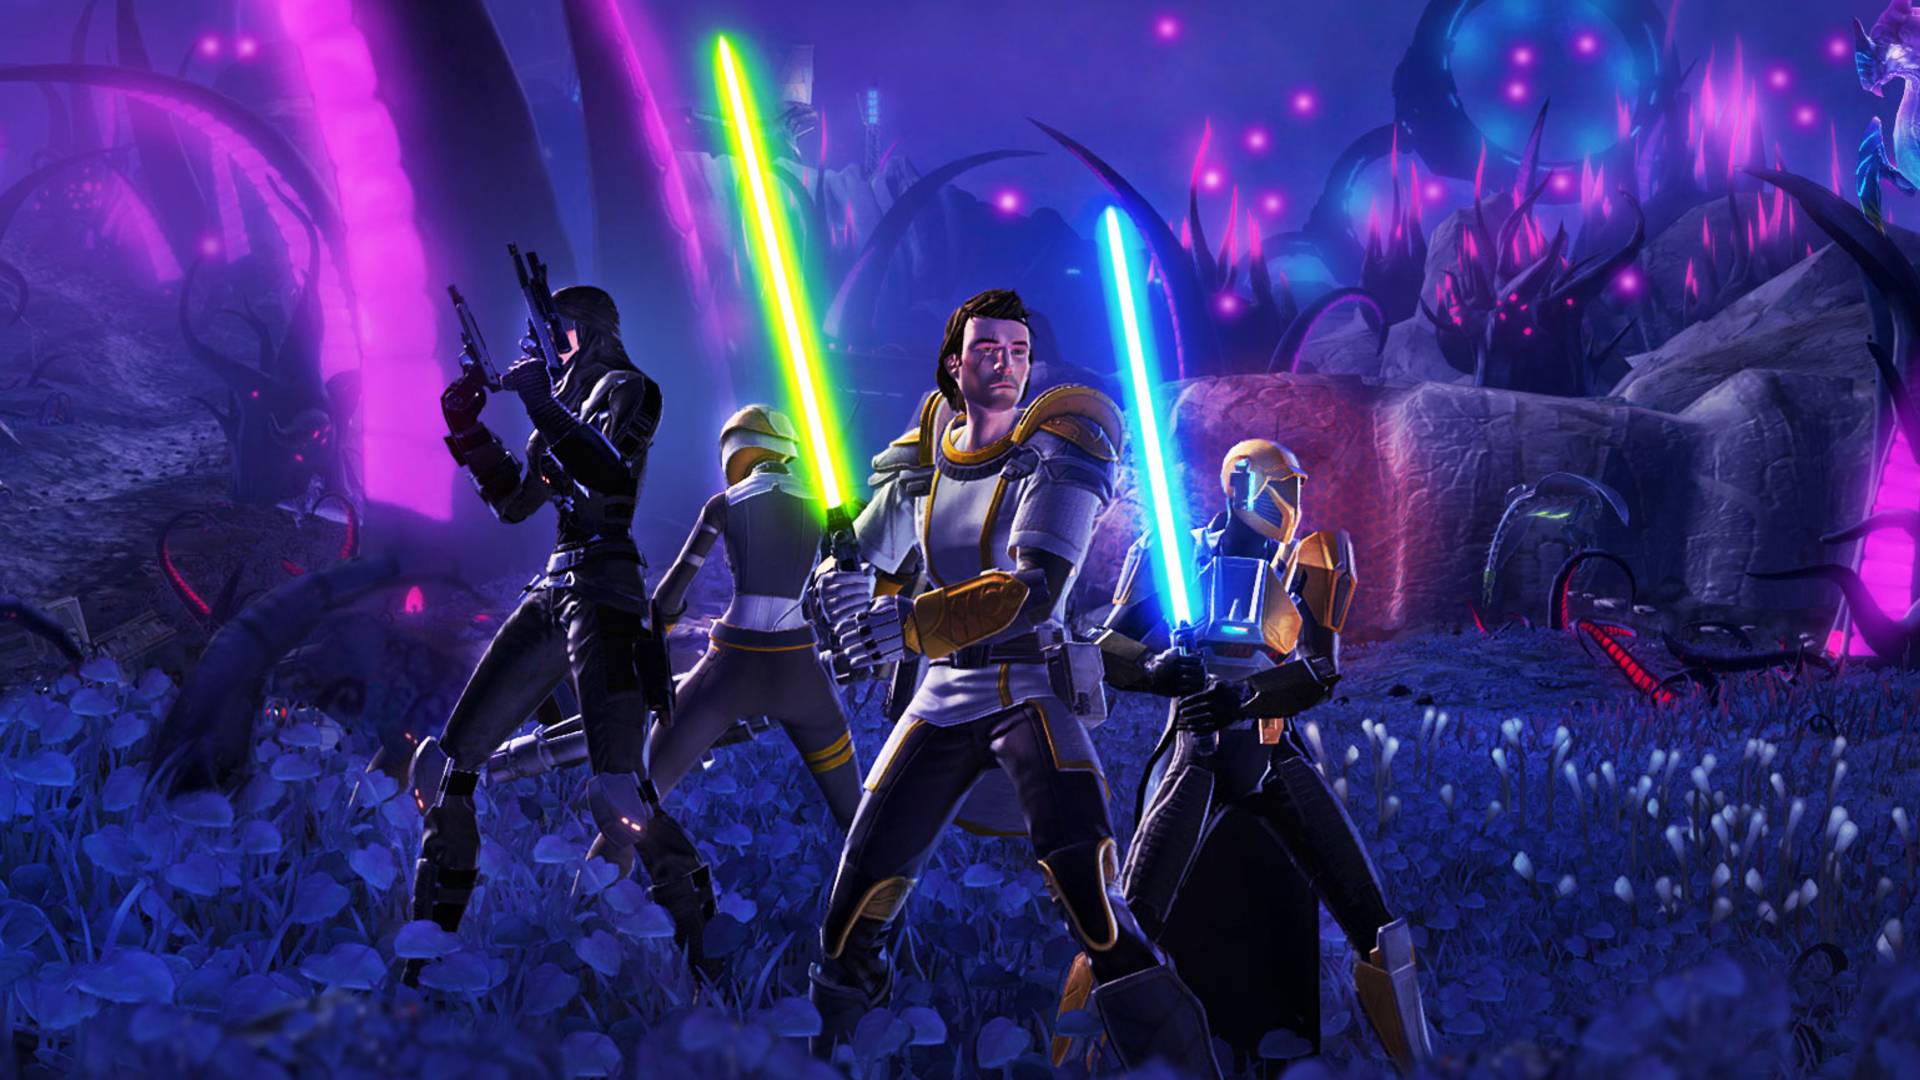 Best free MMOs: Star Wars: The Old Republic. Image shows a group of Jedi preparing for battle.